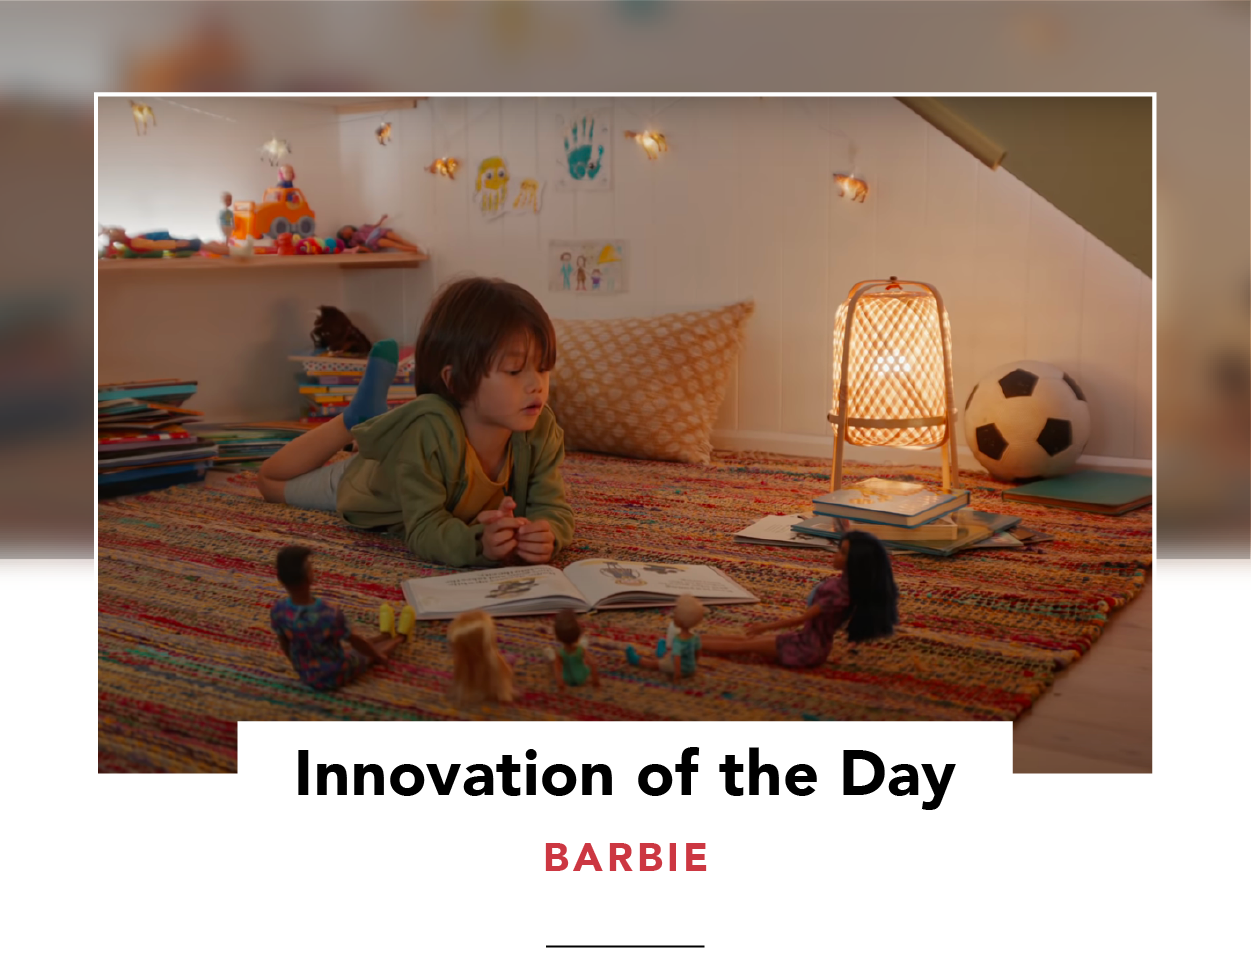 Screenshot from Barbie's ad, showing a child reading to a group of dolls